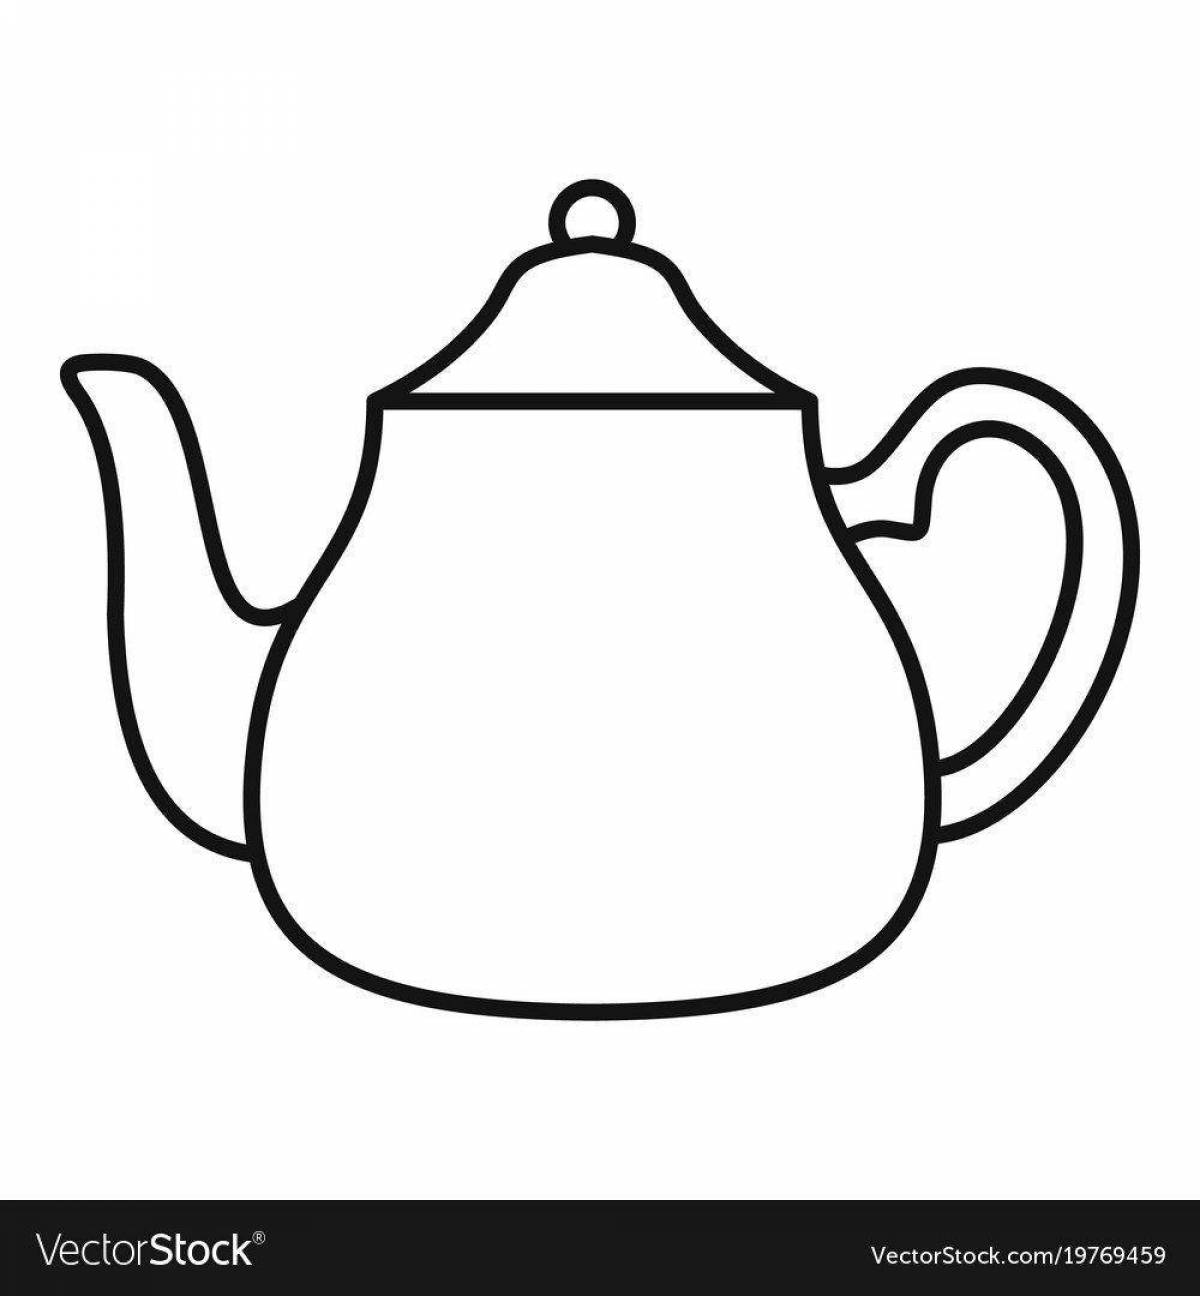 Coloring page happy teapot for kids